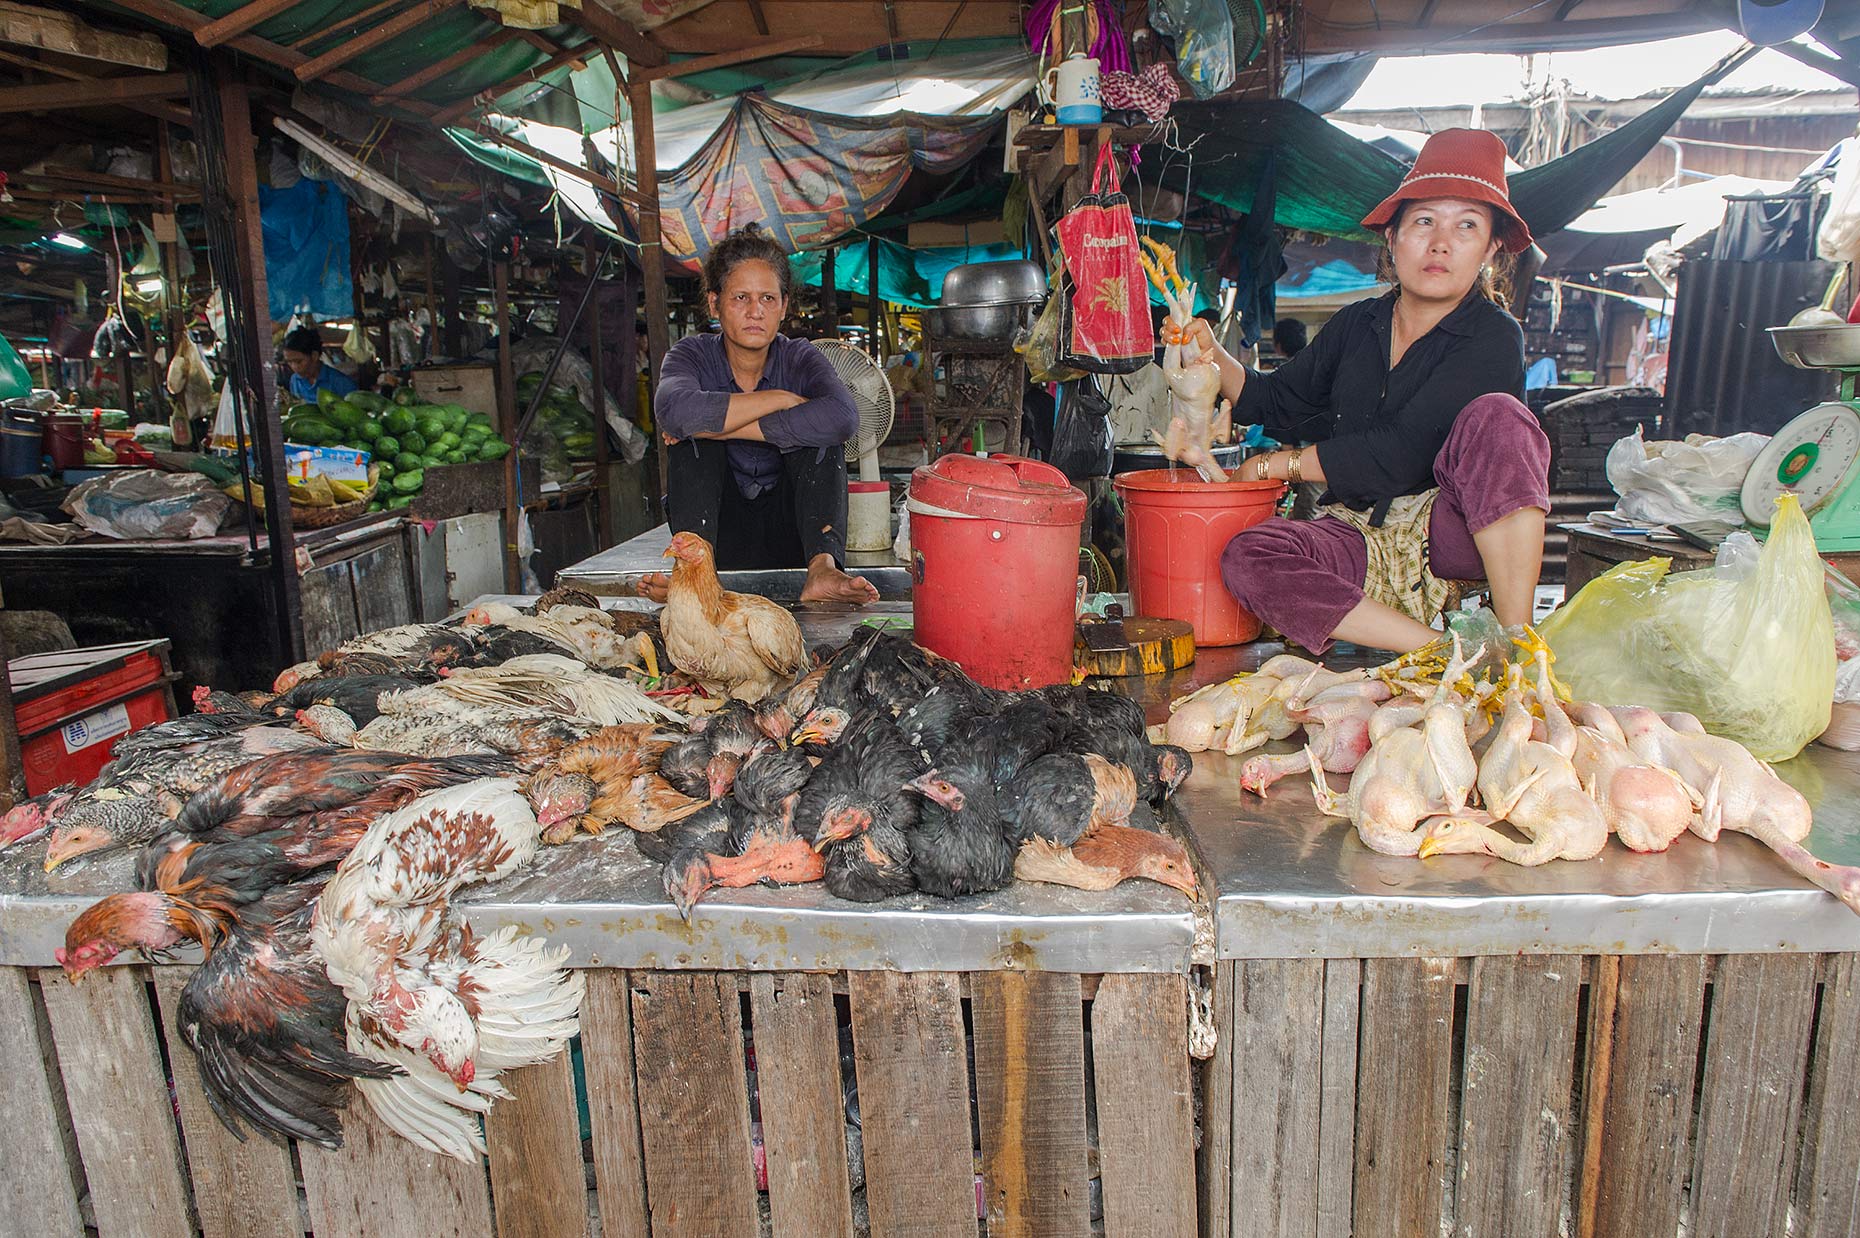 TRA_PhotoReporters_poultry-vendor-at-market_Cambodia